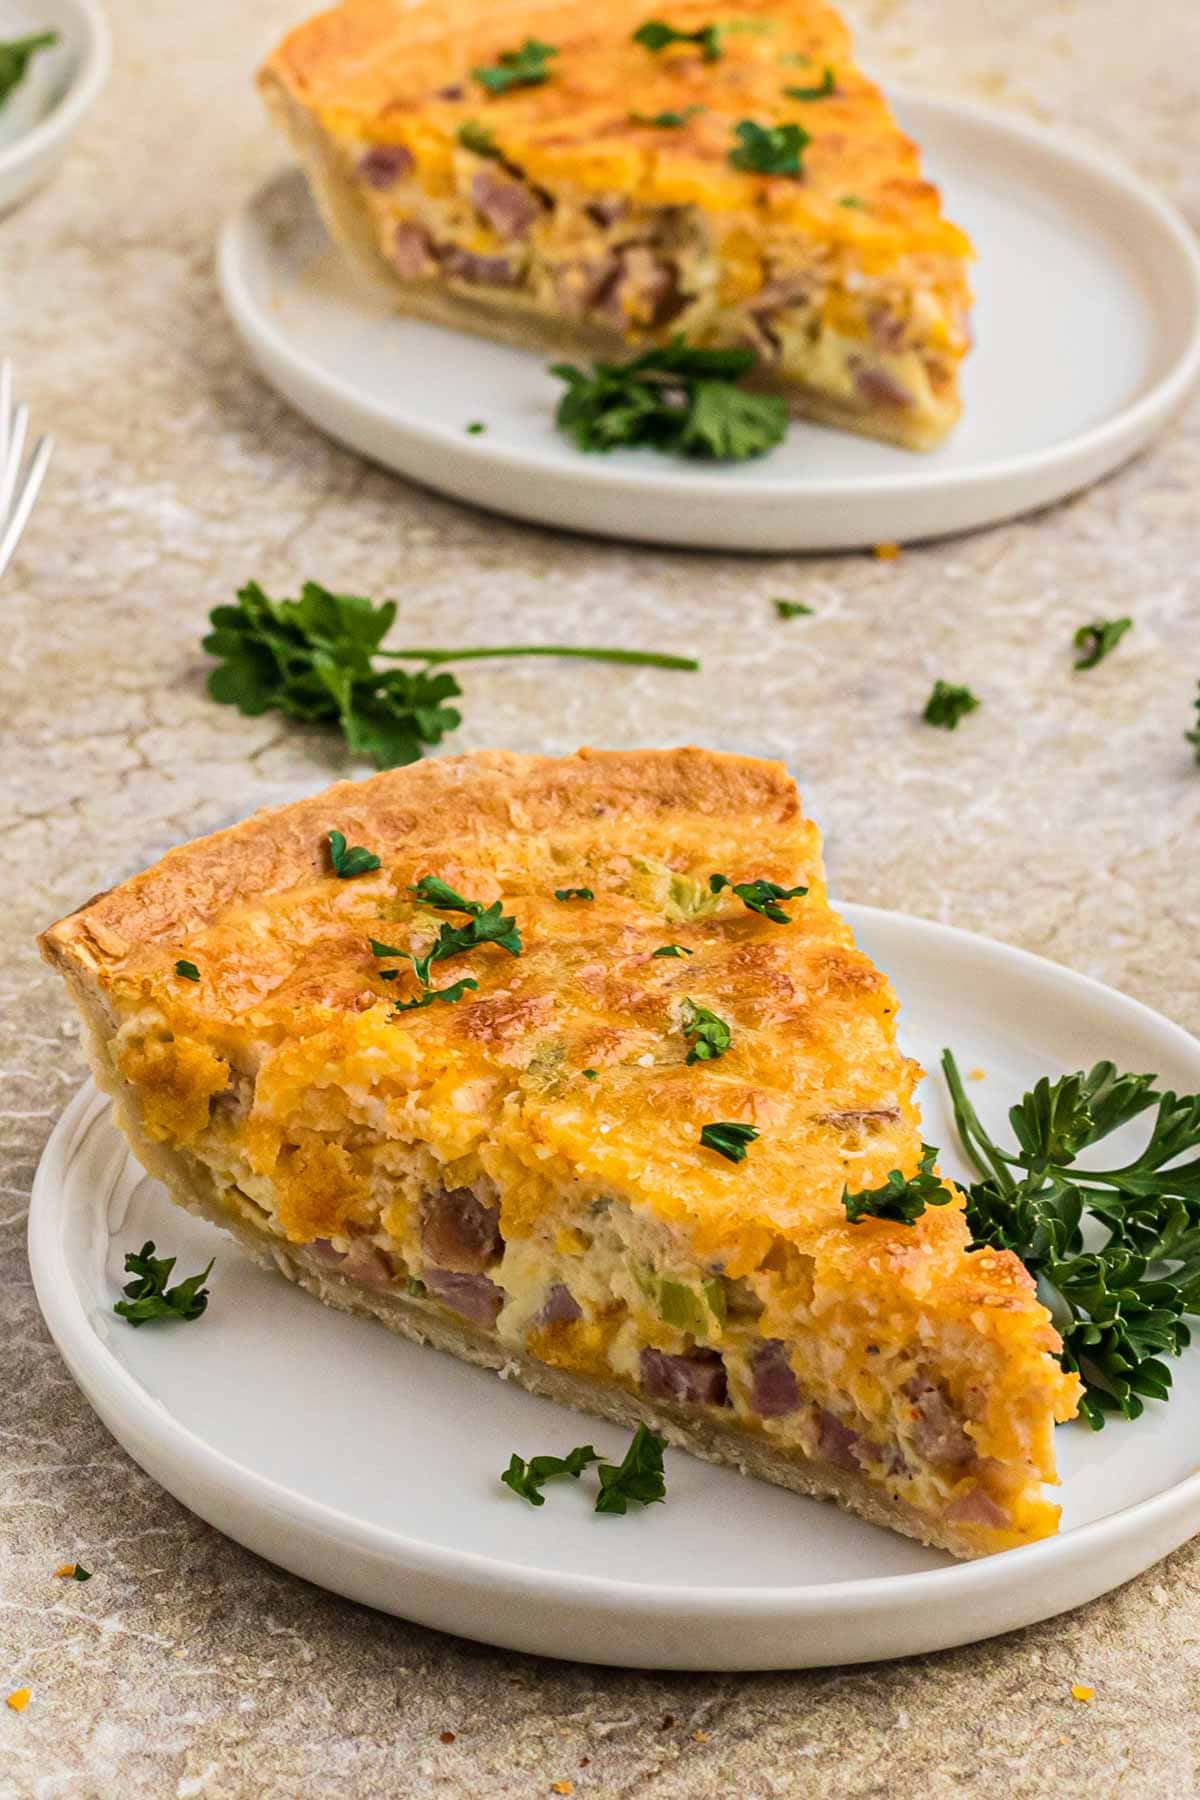 A slice of quiche on a small plate